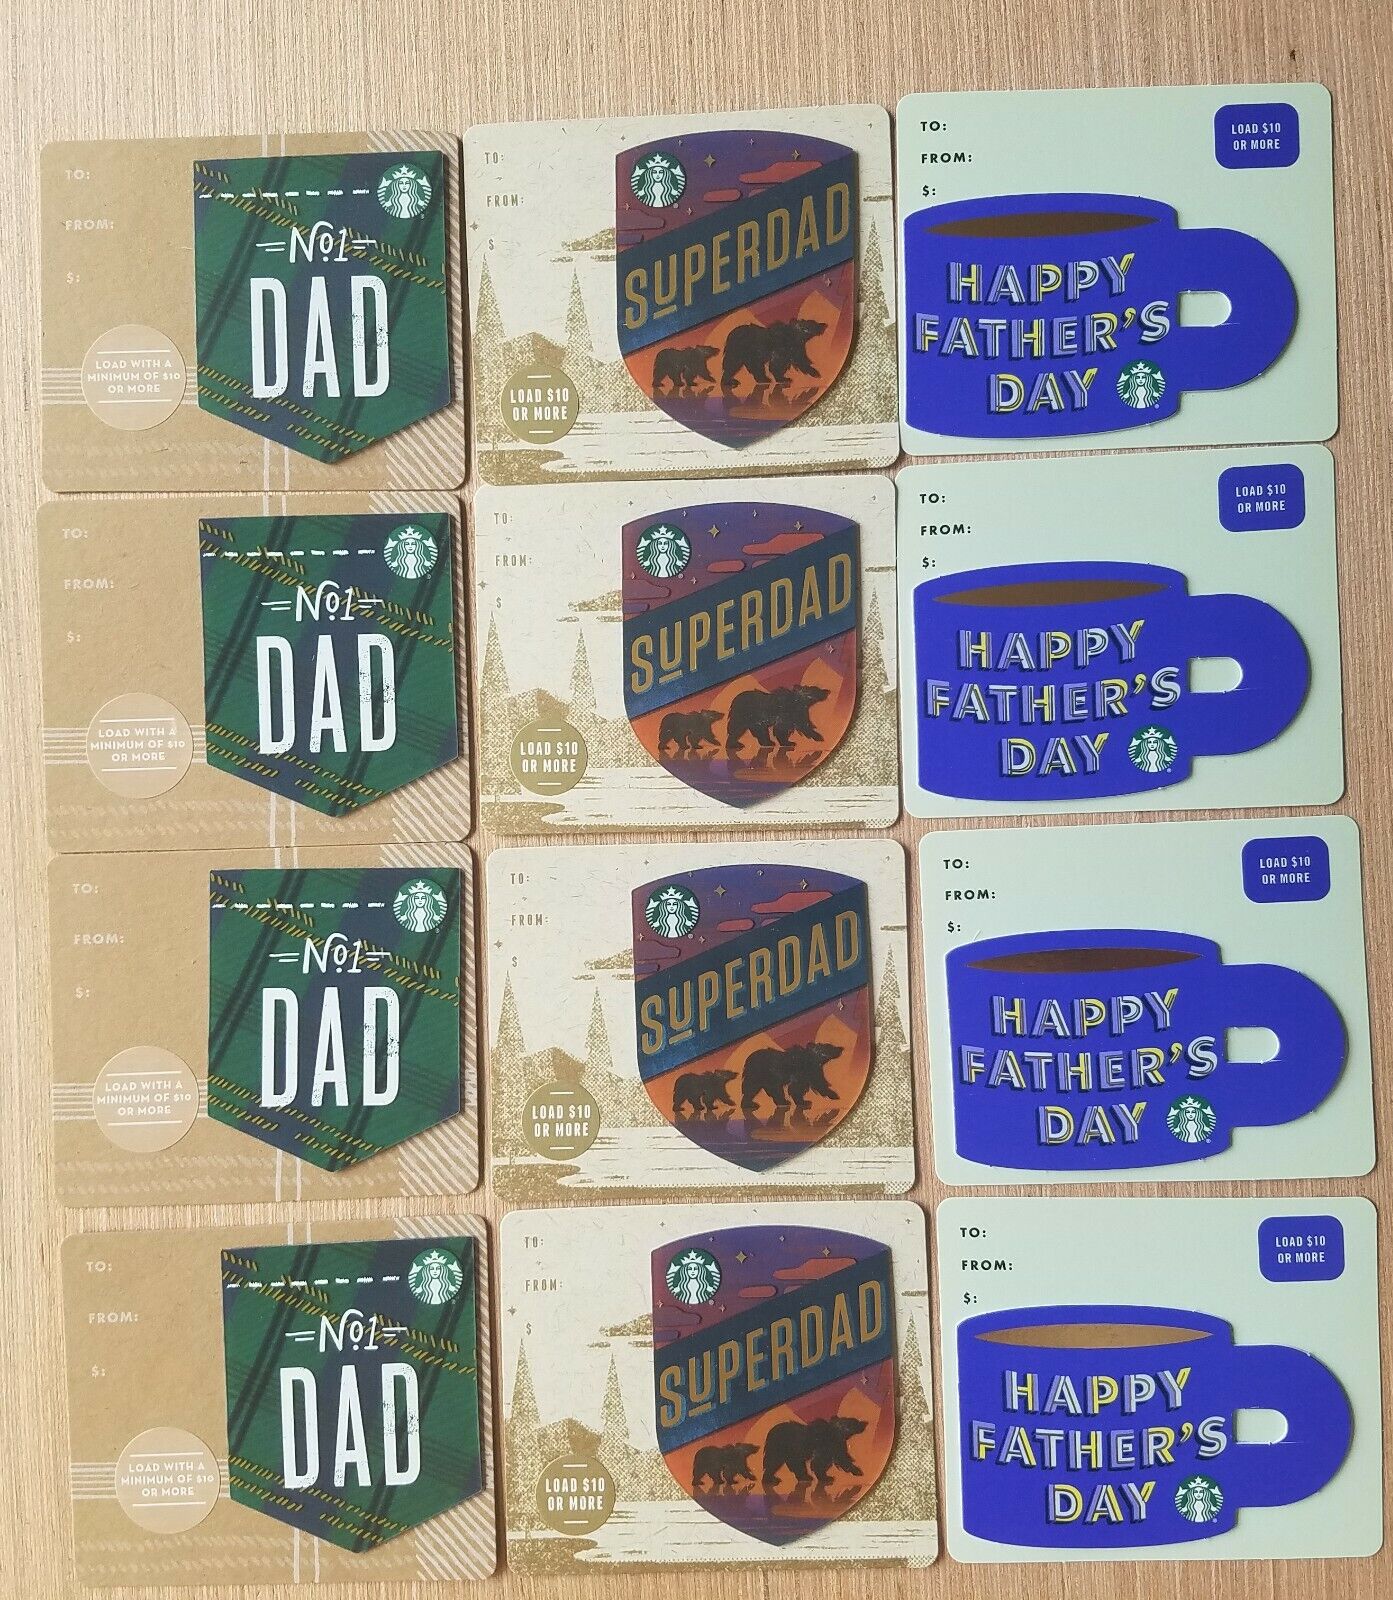 12 Starbucks Father\'s day die cut key chain gift cards 2018-2020 for collectors